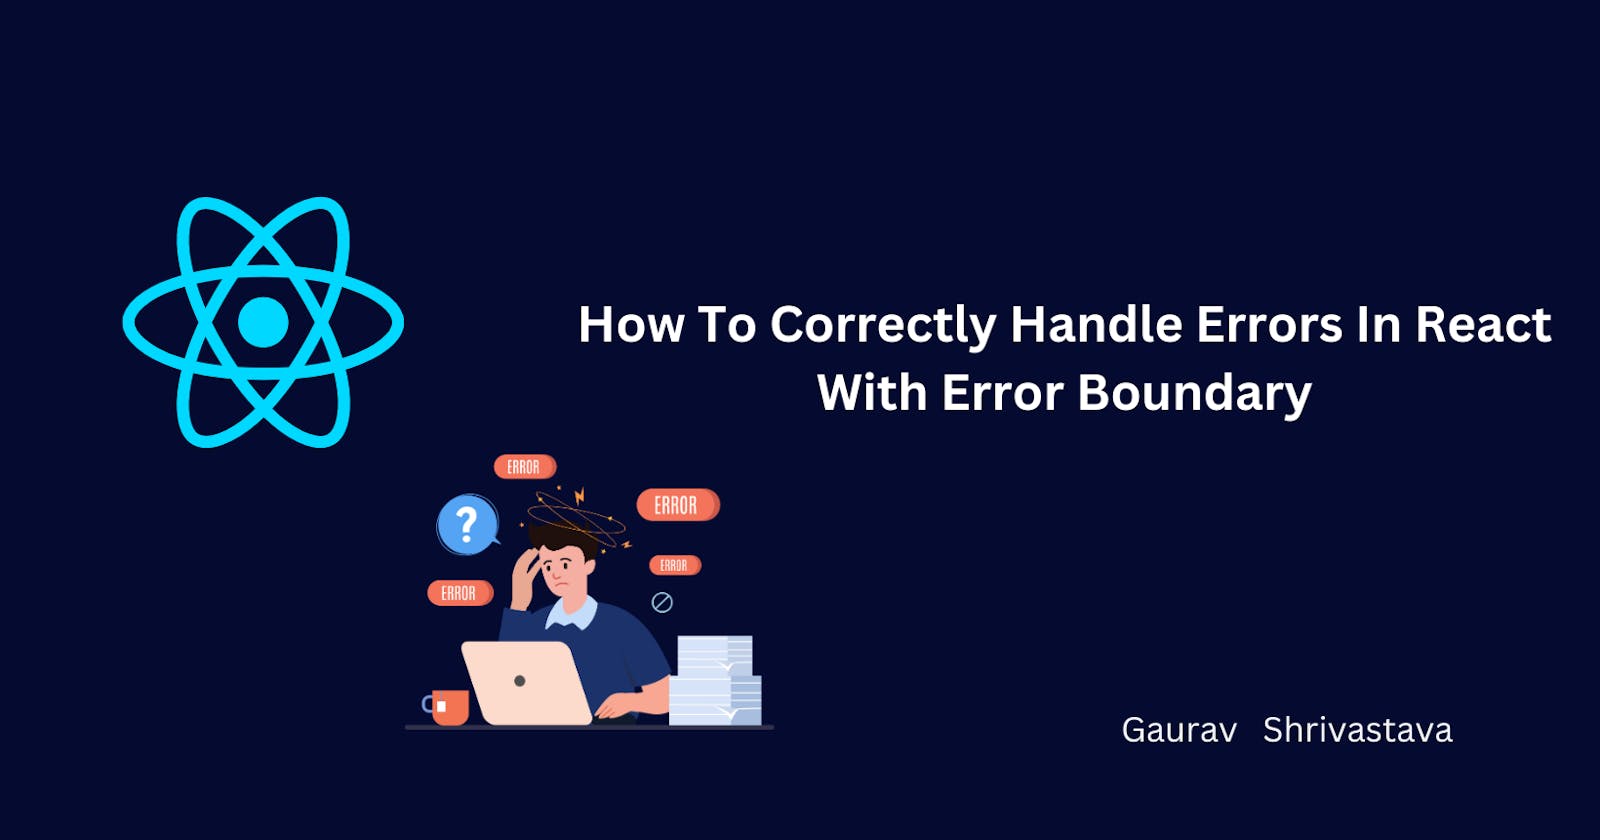 How To Correctly Handle Errors In React With Error Boundary